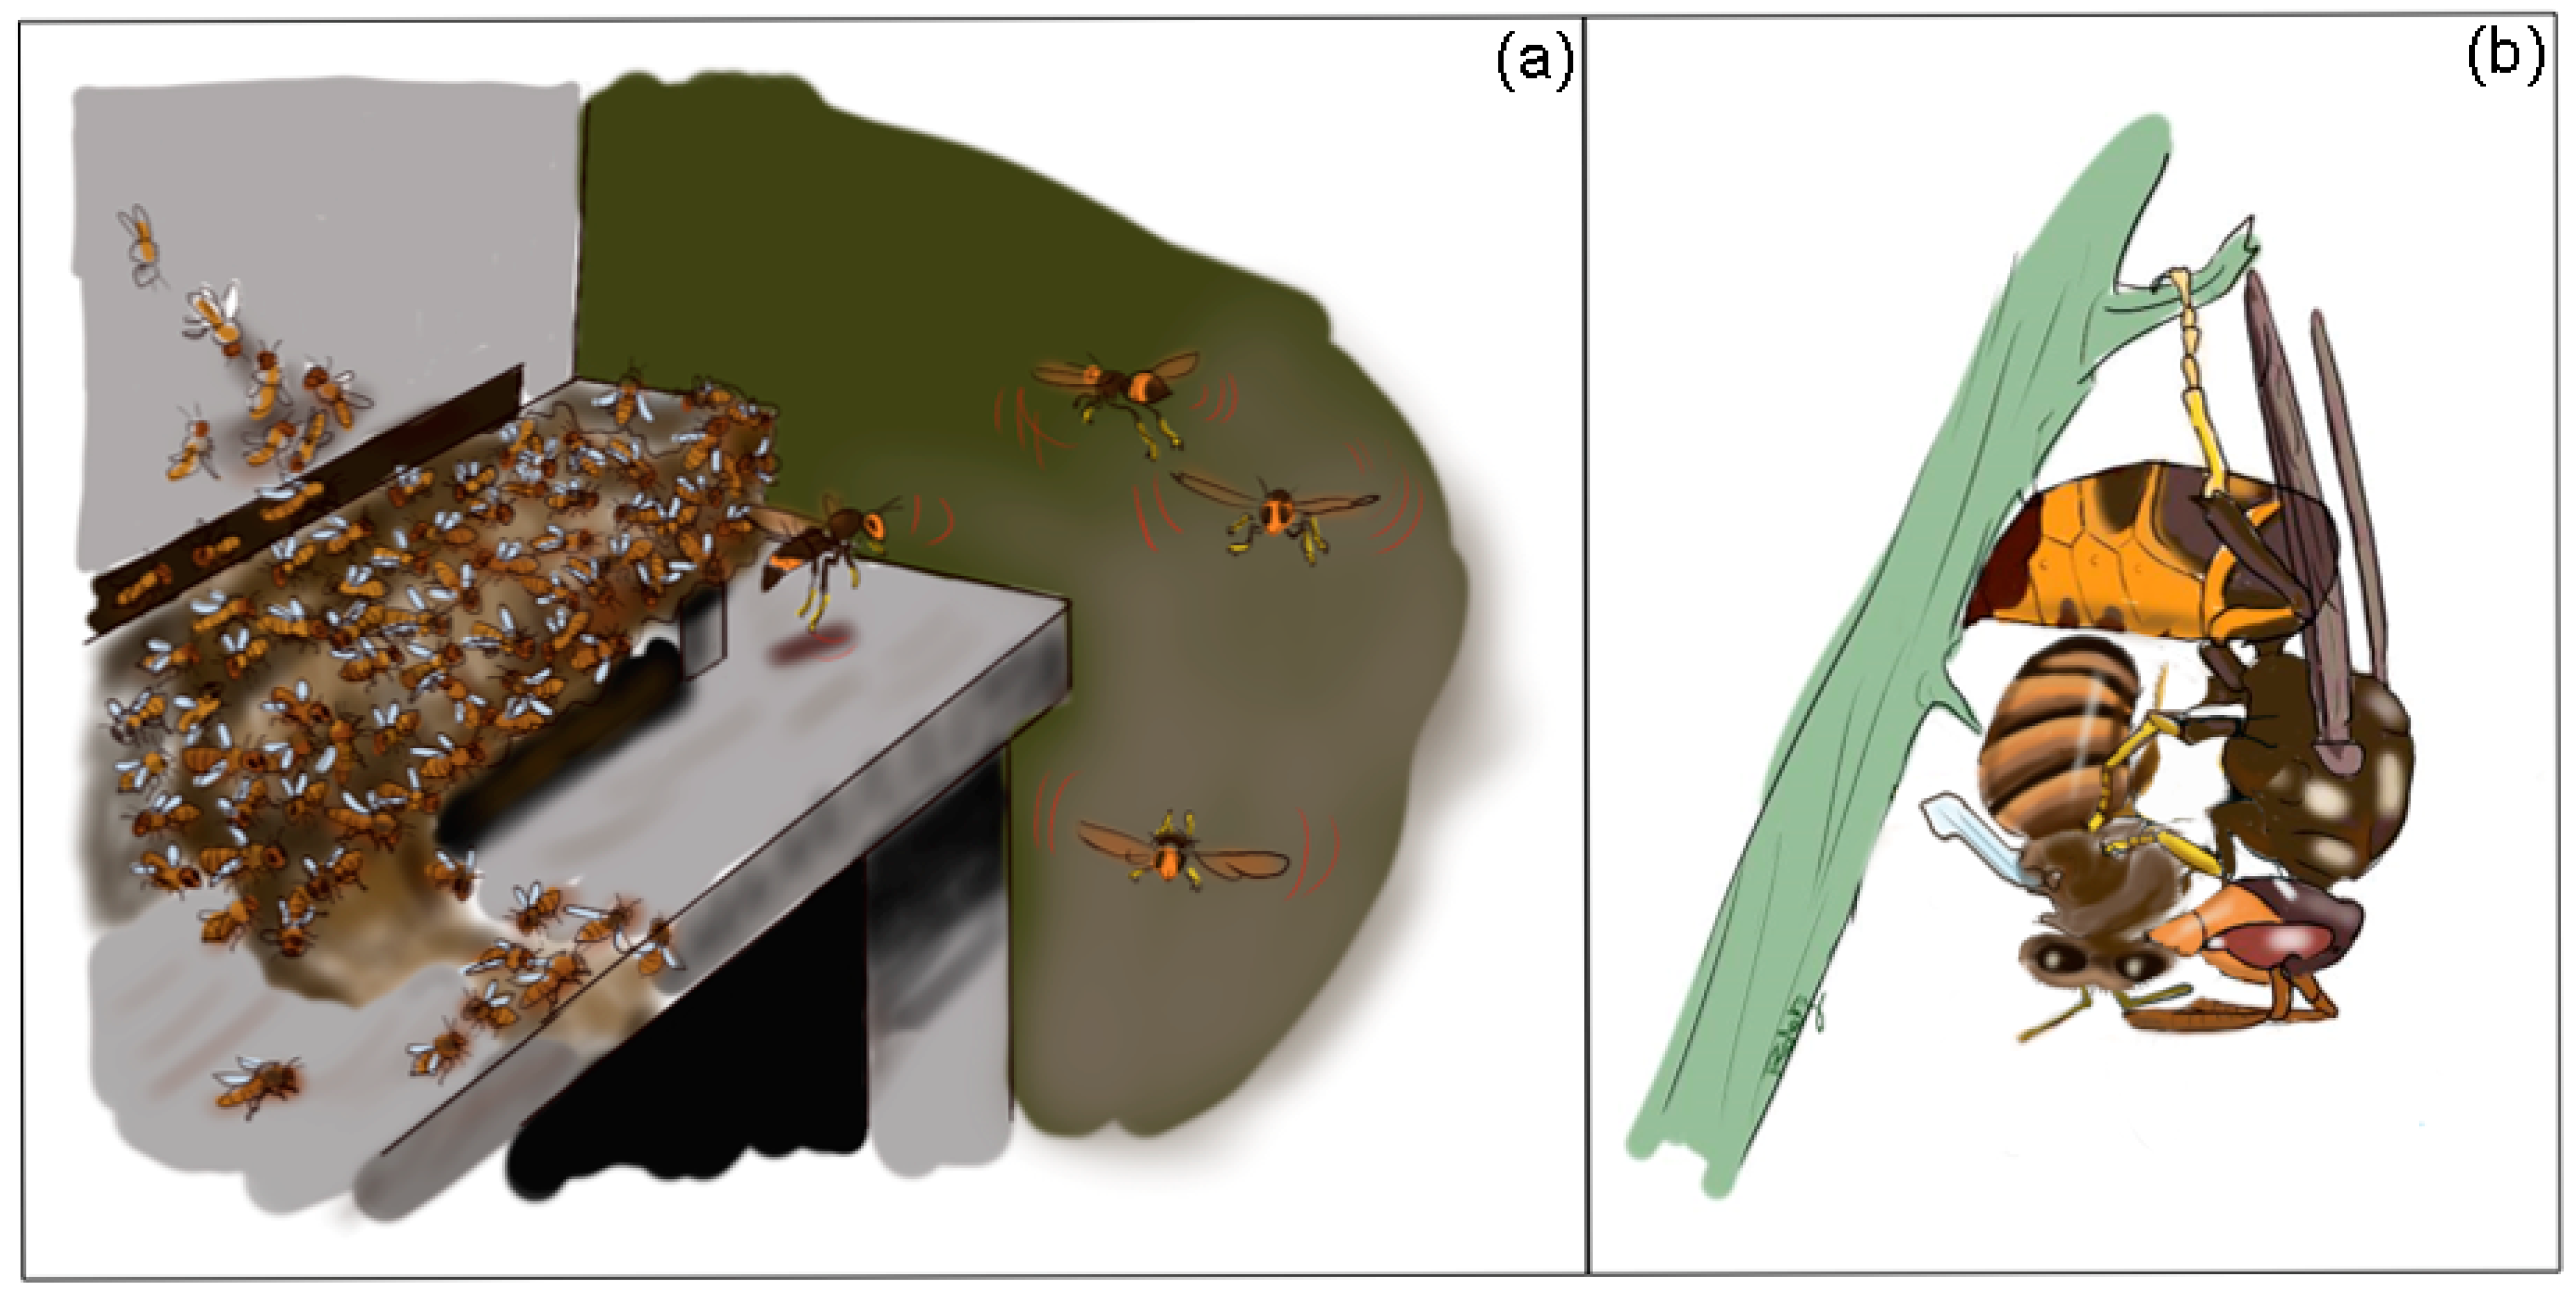 https://pub.mdpi-res.com/insects/insects-12-01037/article_deploy/html/images/insects-12-01037-g001.png?1637567369